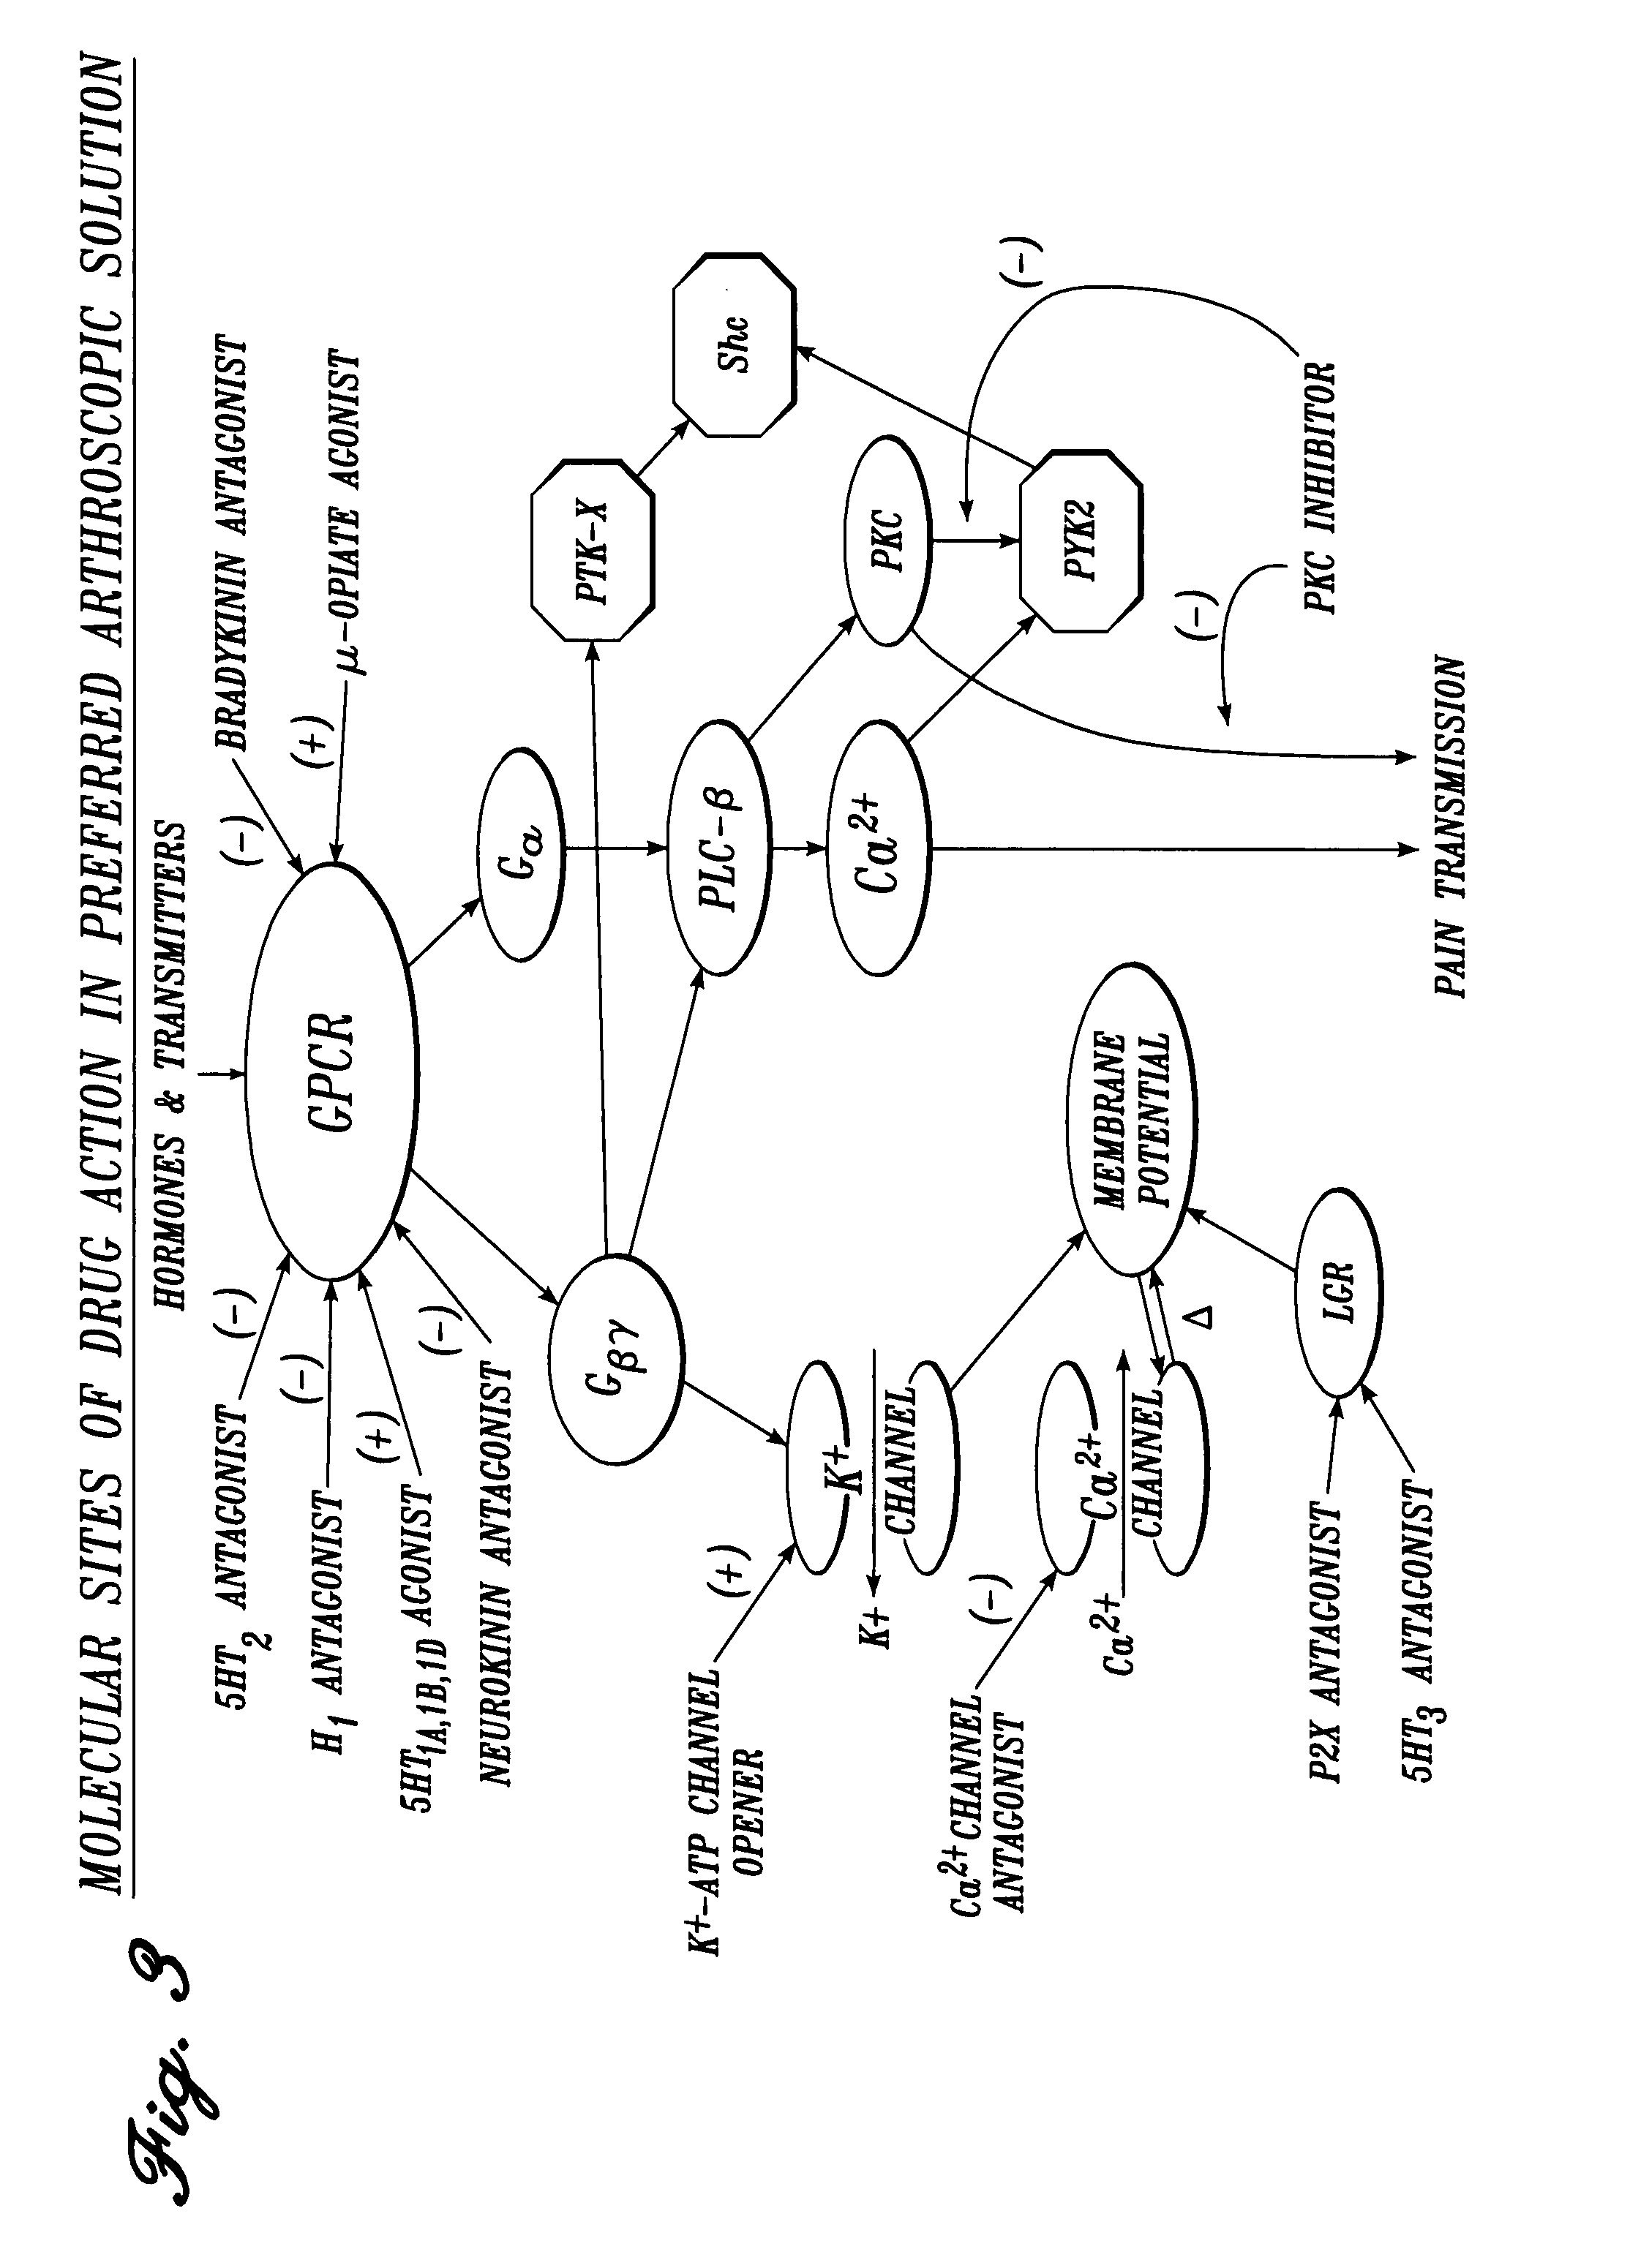 Cardiovascular compositions and methods using combinations of anti-platelet agents